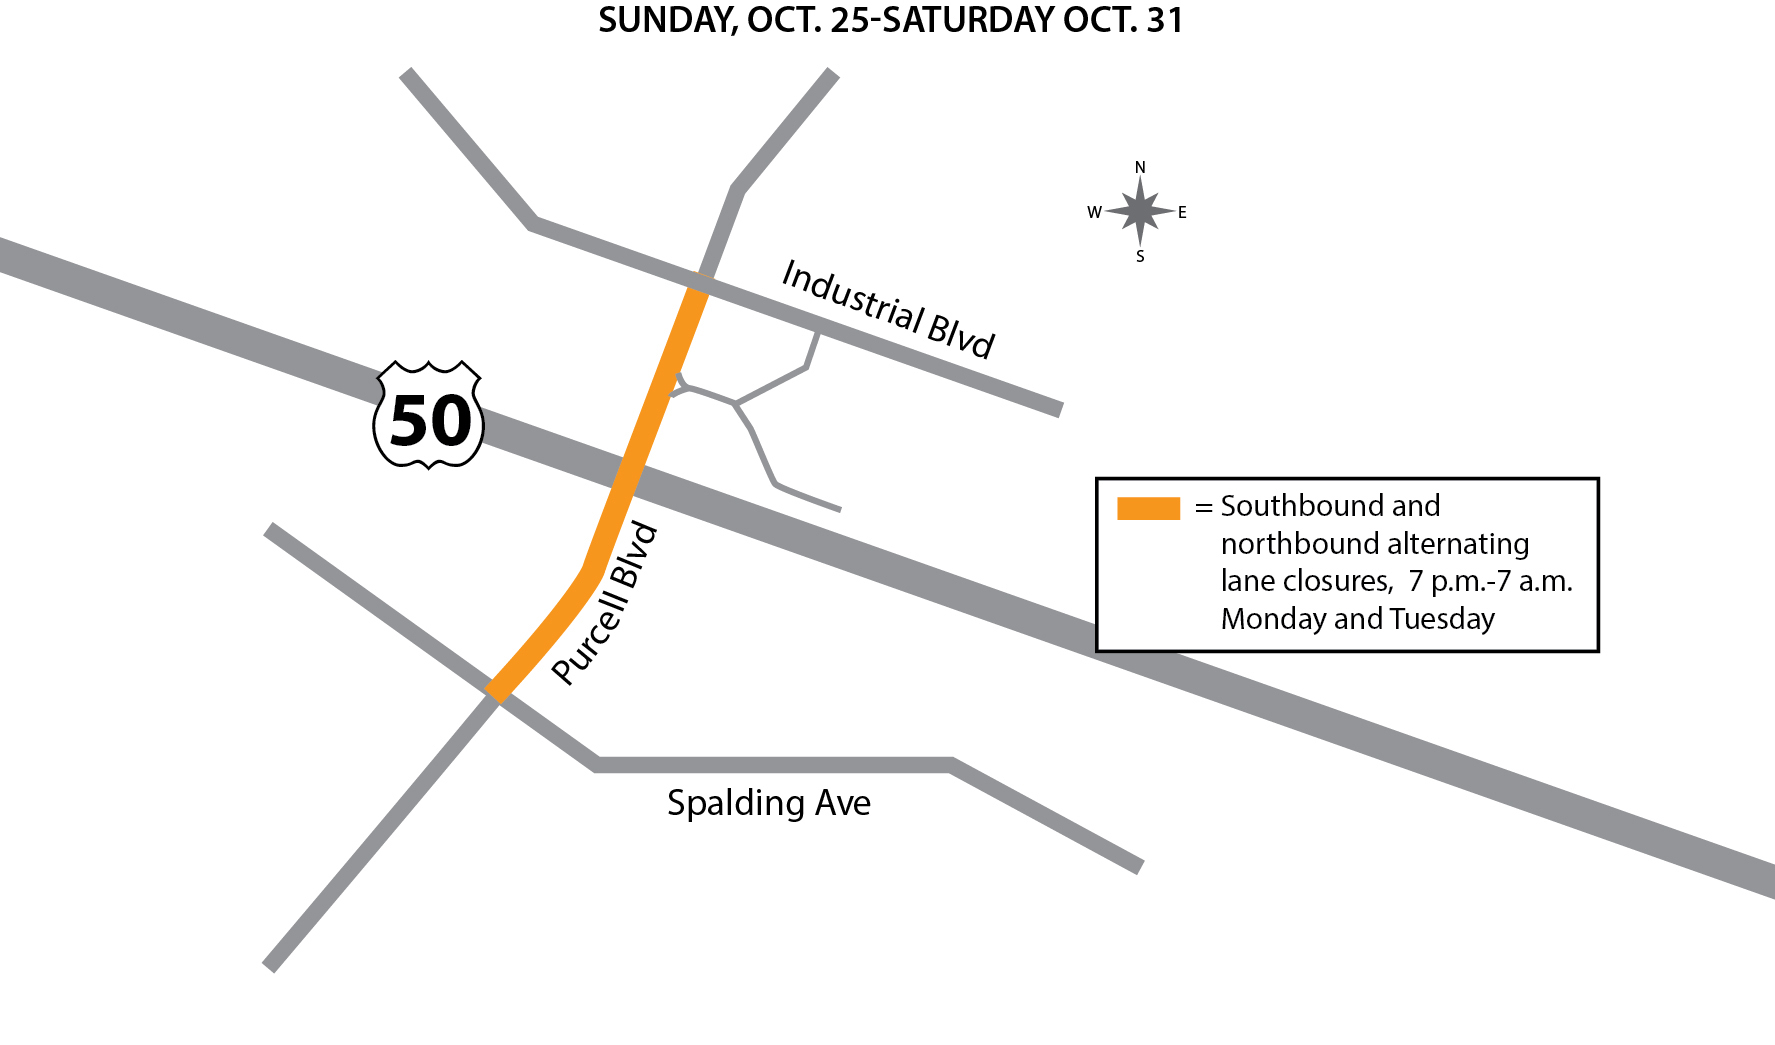 US 50 Purcell TrafficAdv map Oct25a.jpg detail image